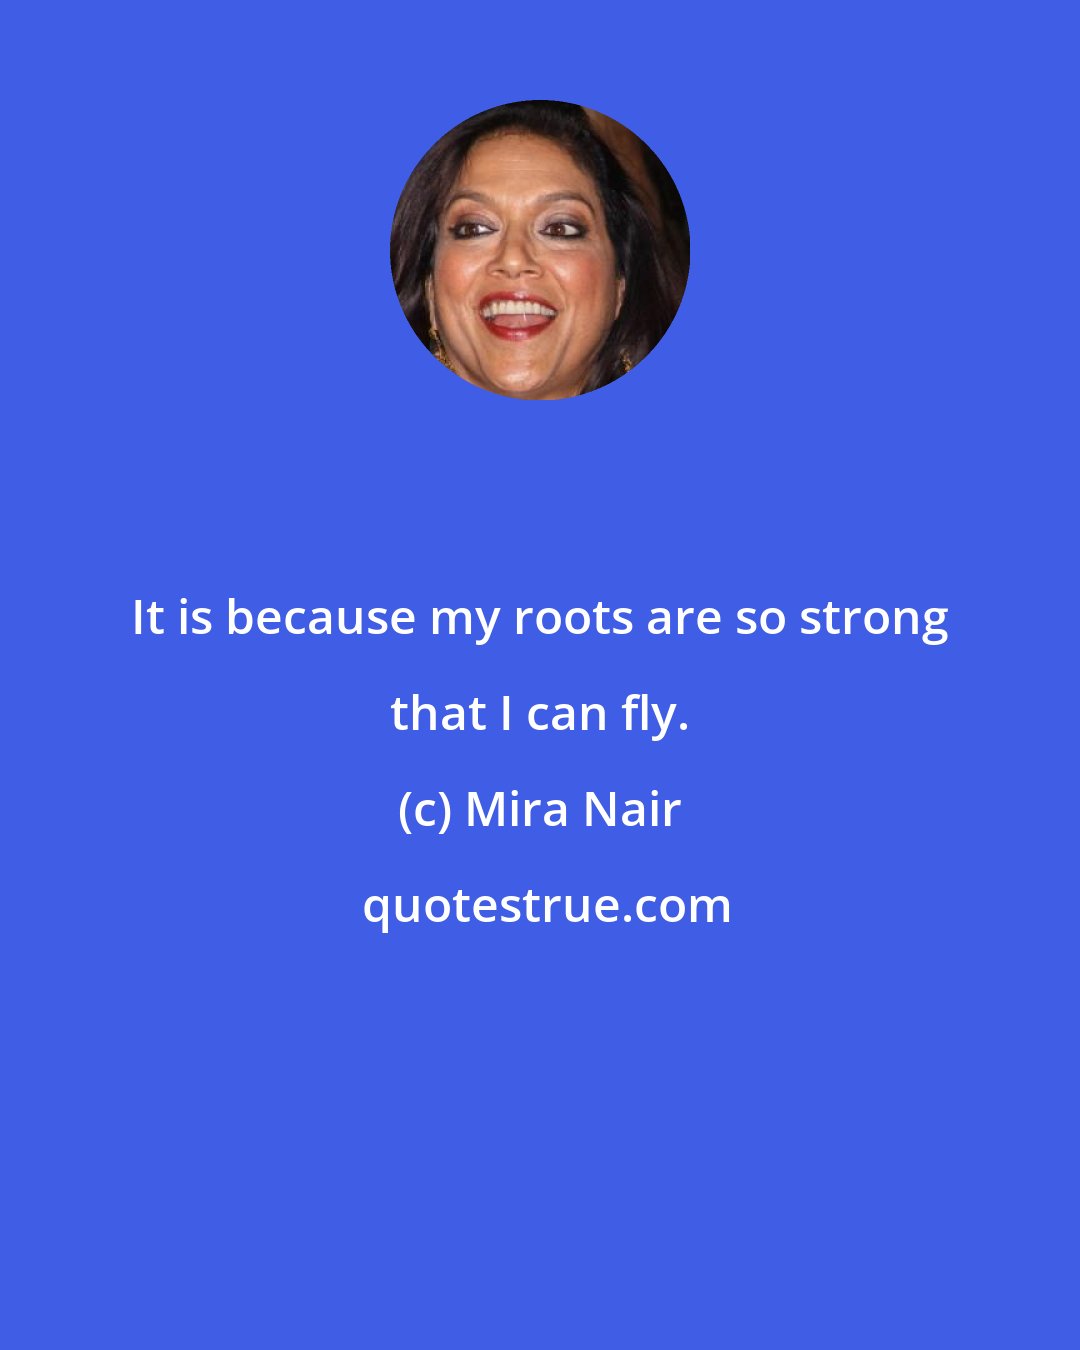 Mira Nair: It is because my roots are so strong that I can fly.